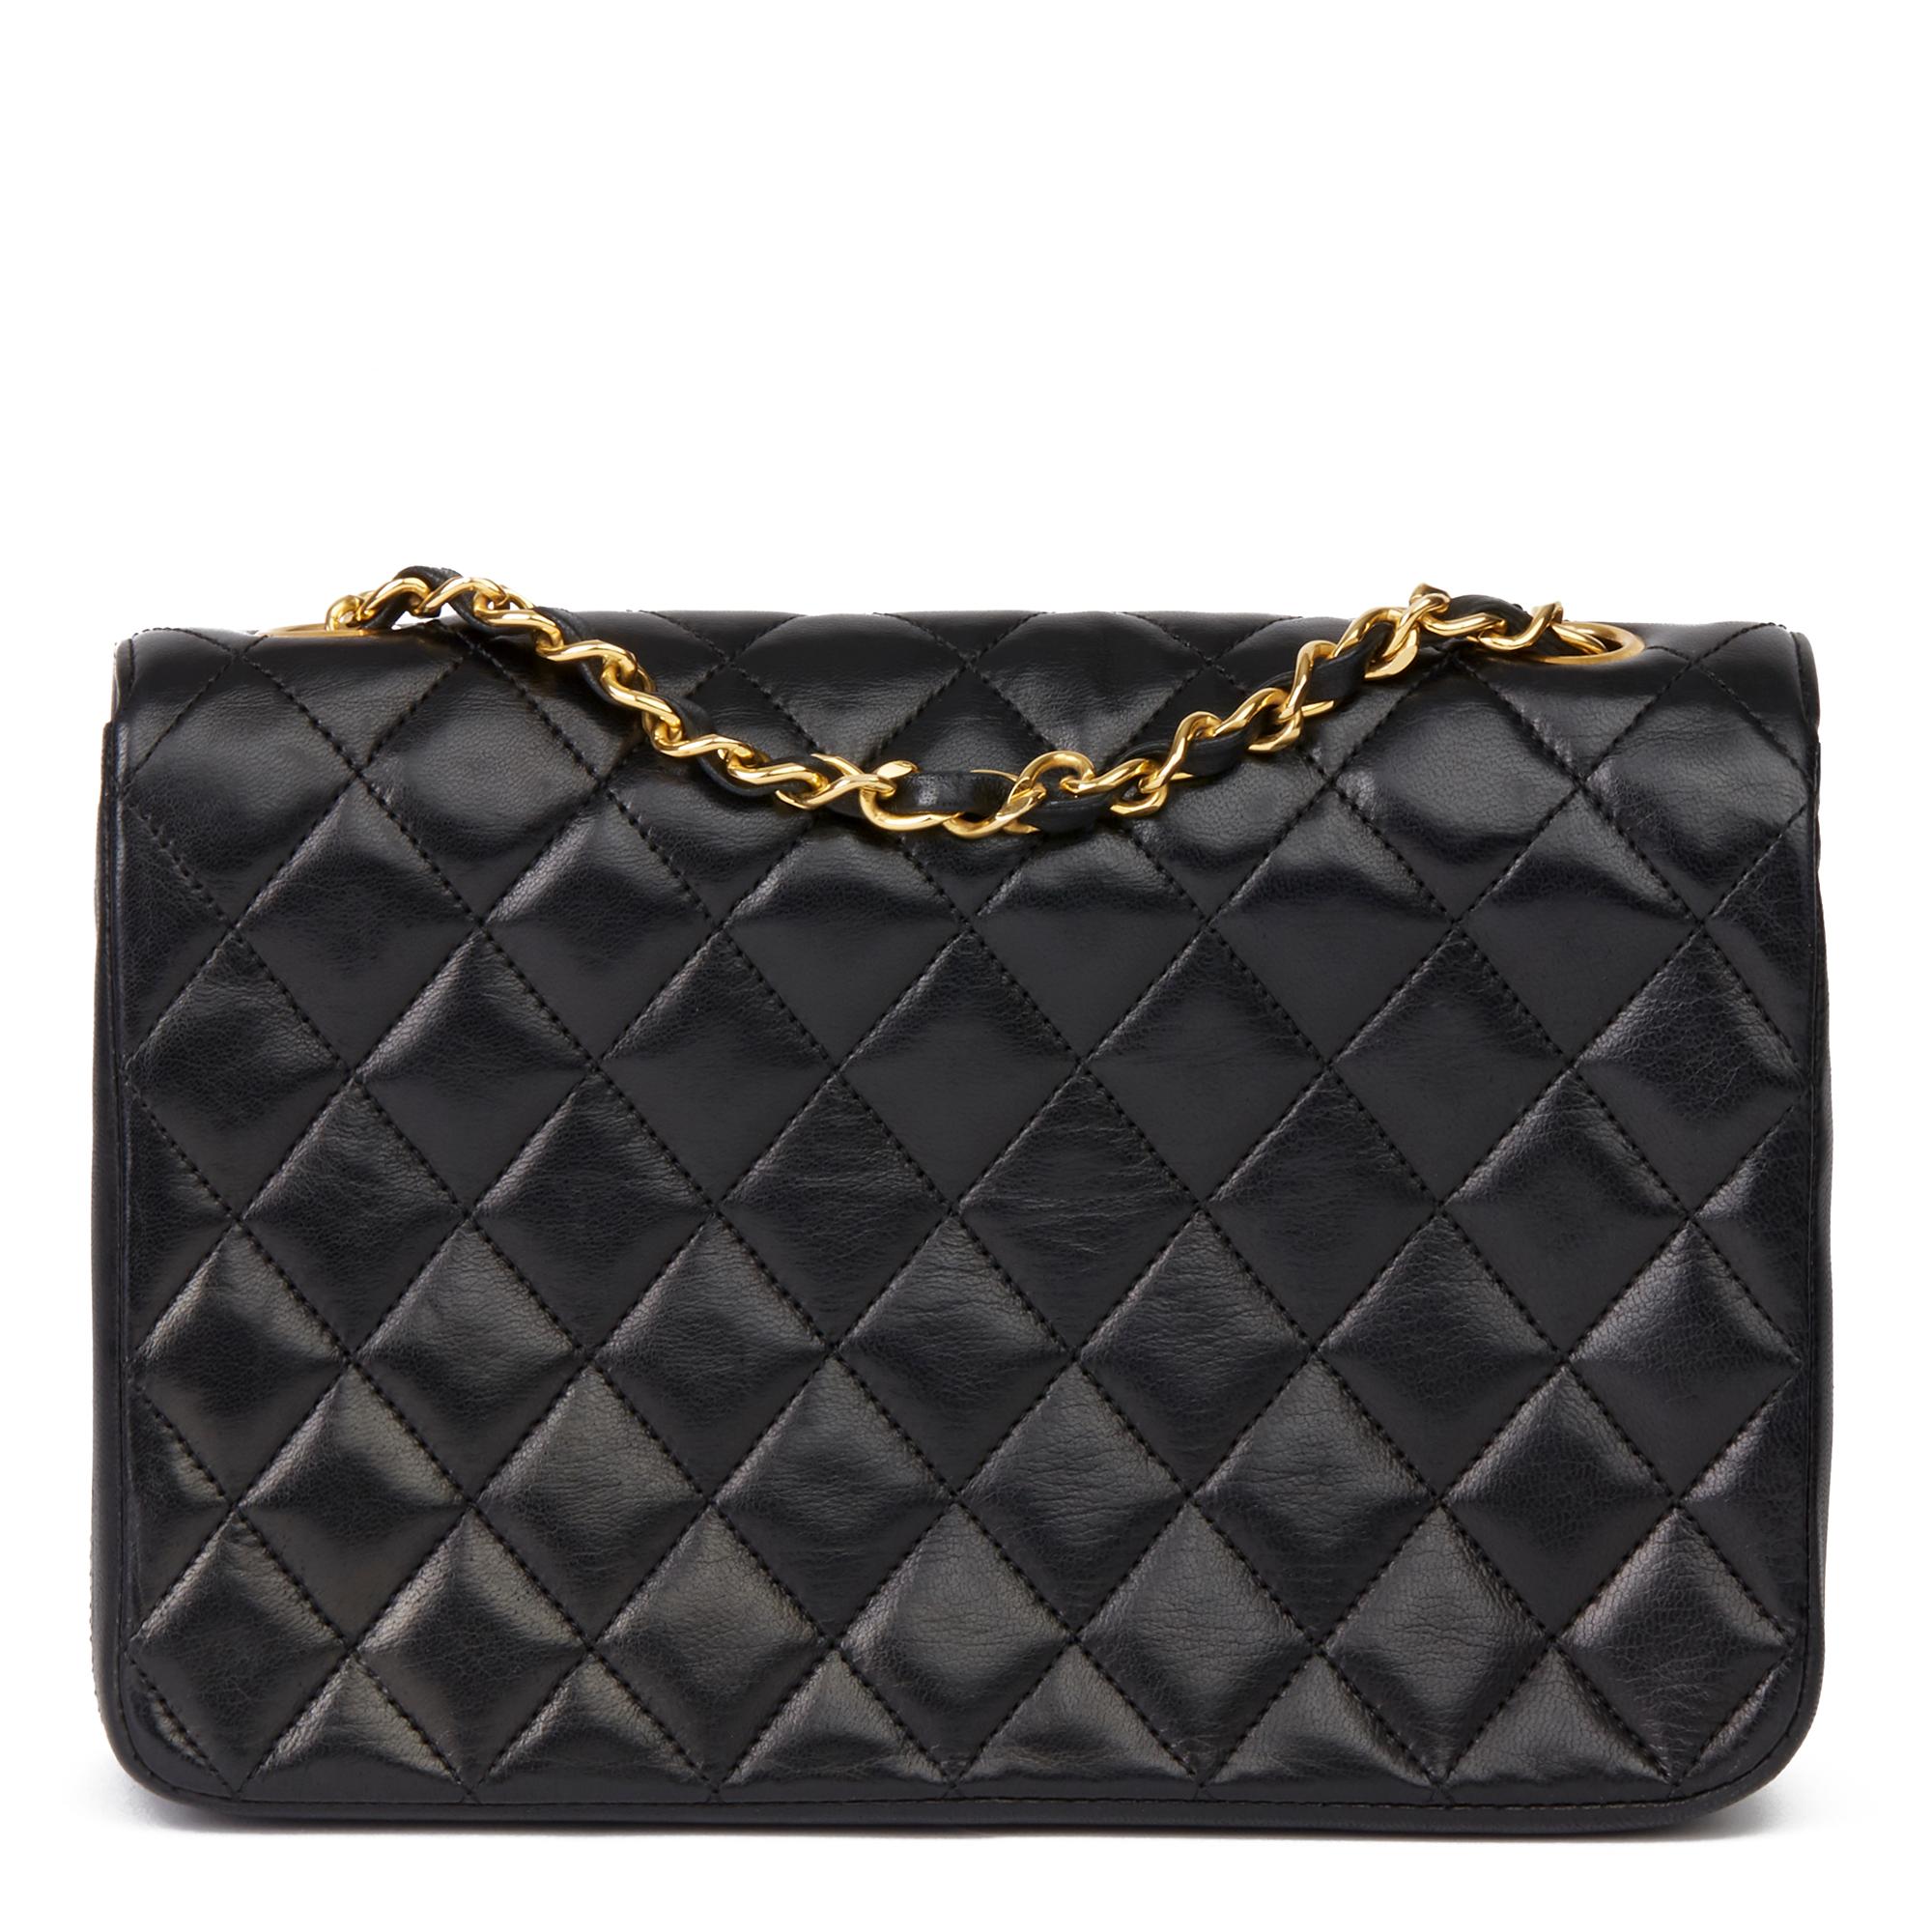 1988 Chanel Black Quilted Lambskin Vintage Classic Single Flap Bag 1